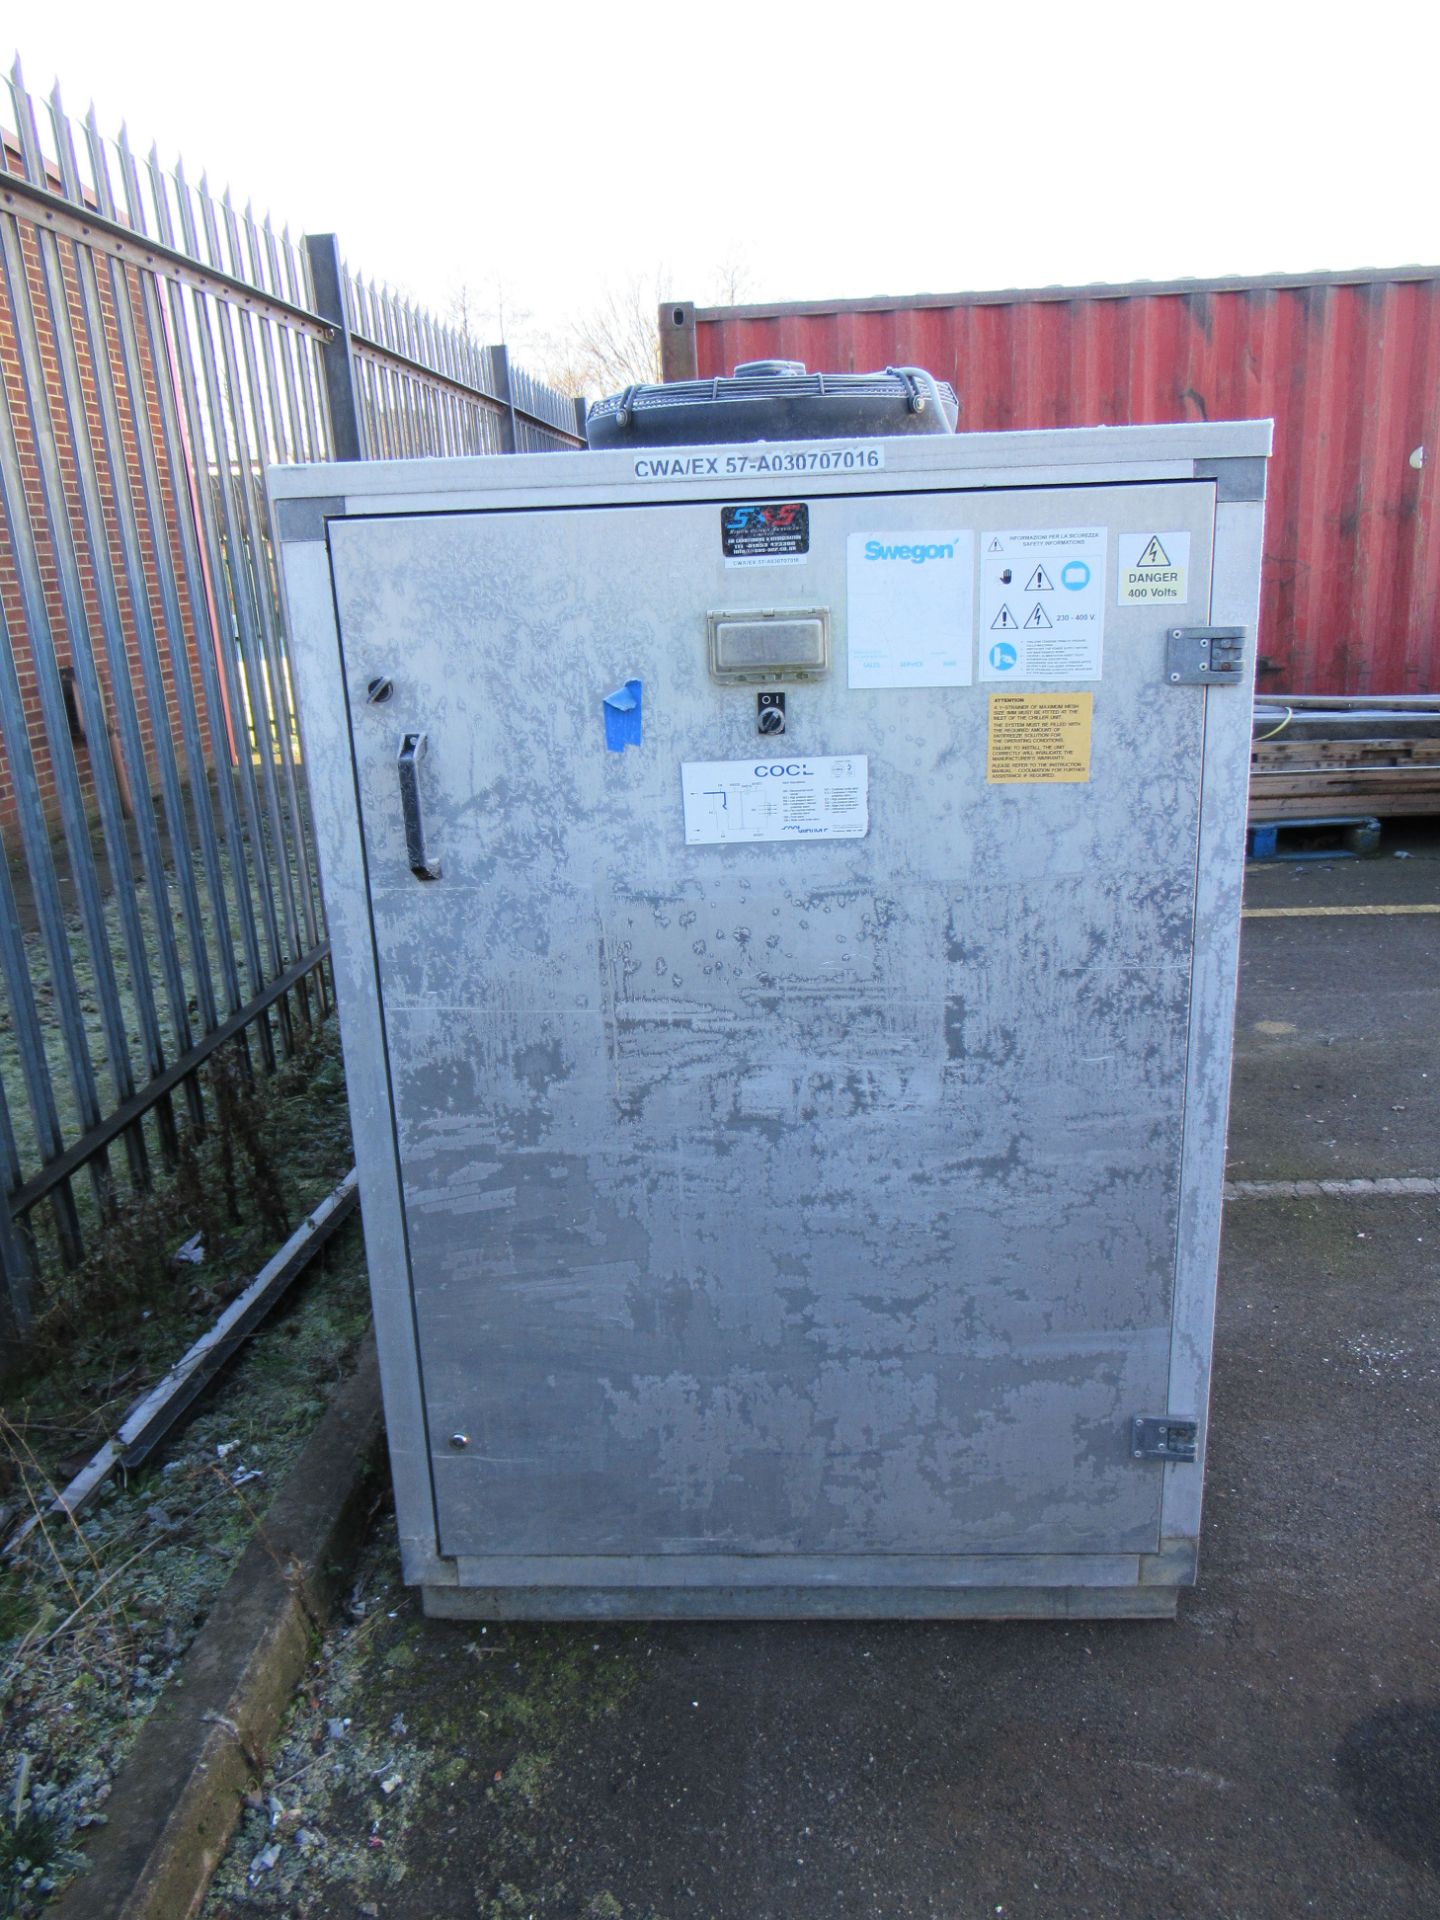 Rhoss industrial water chiller, model number CWA/EX57,66 kW cooling capacity - Image 2 of 14